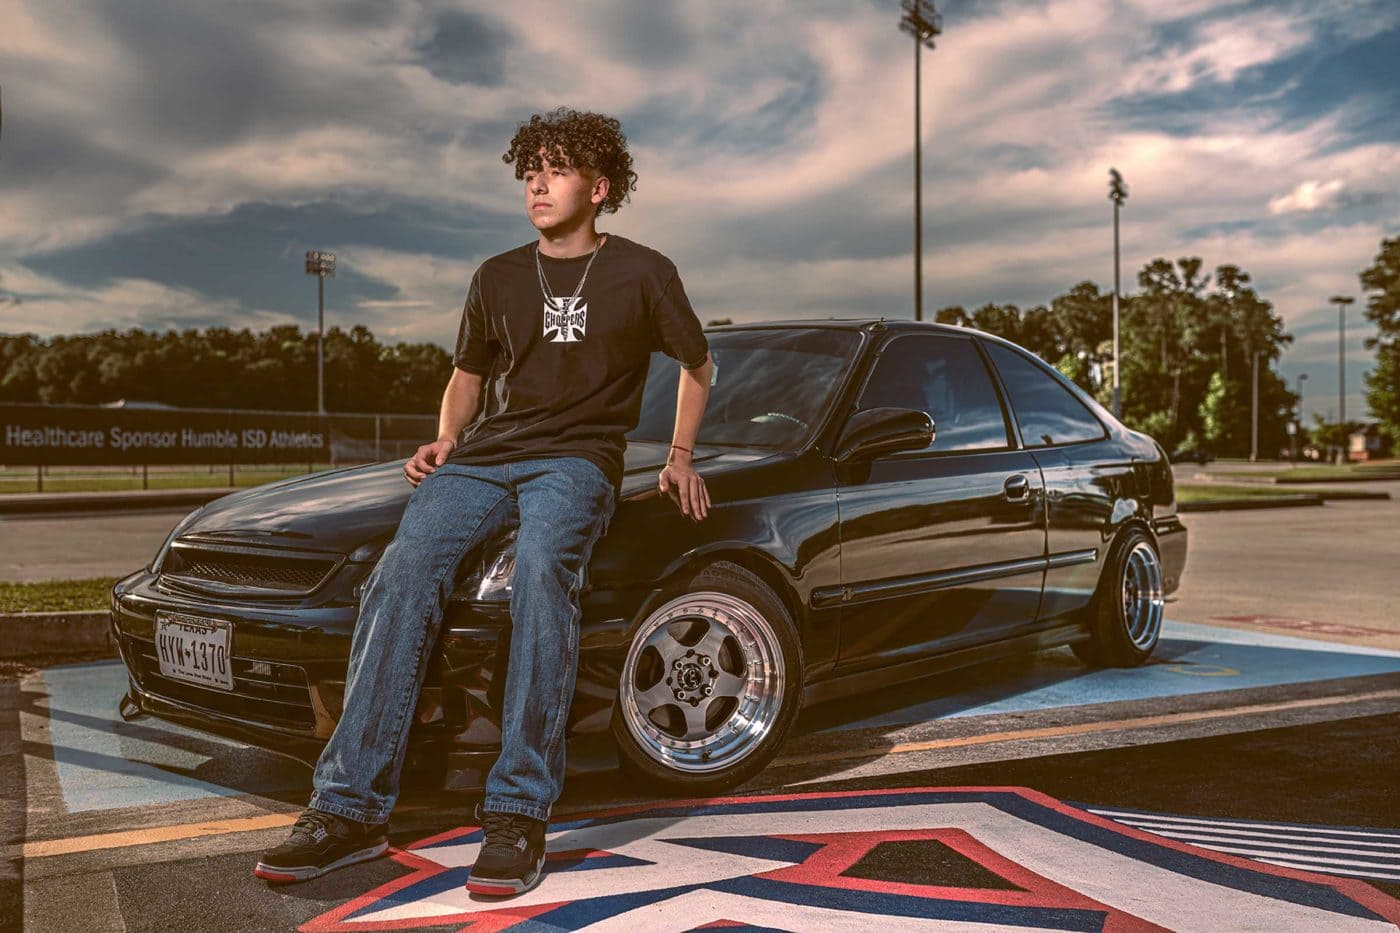 Chris Spicks Photography captures a young man in front of a black car with his creative and unique approach as a Houston photographer.